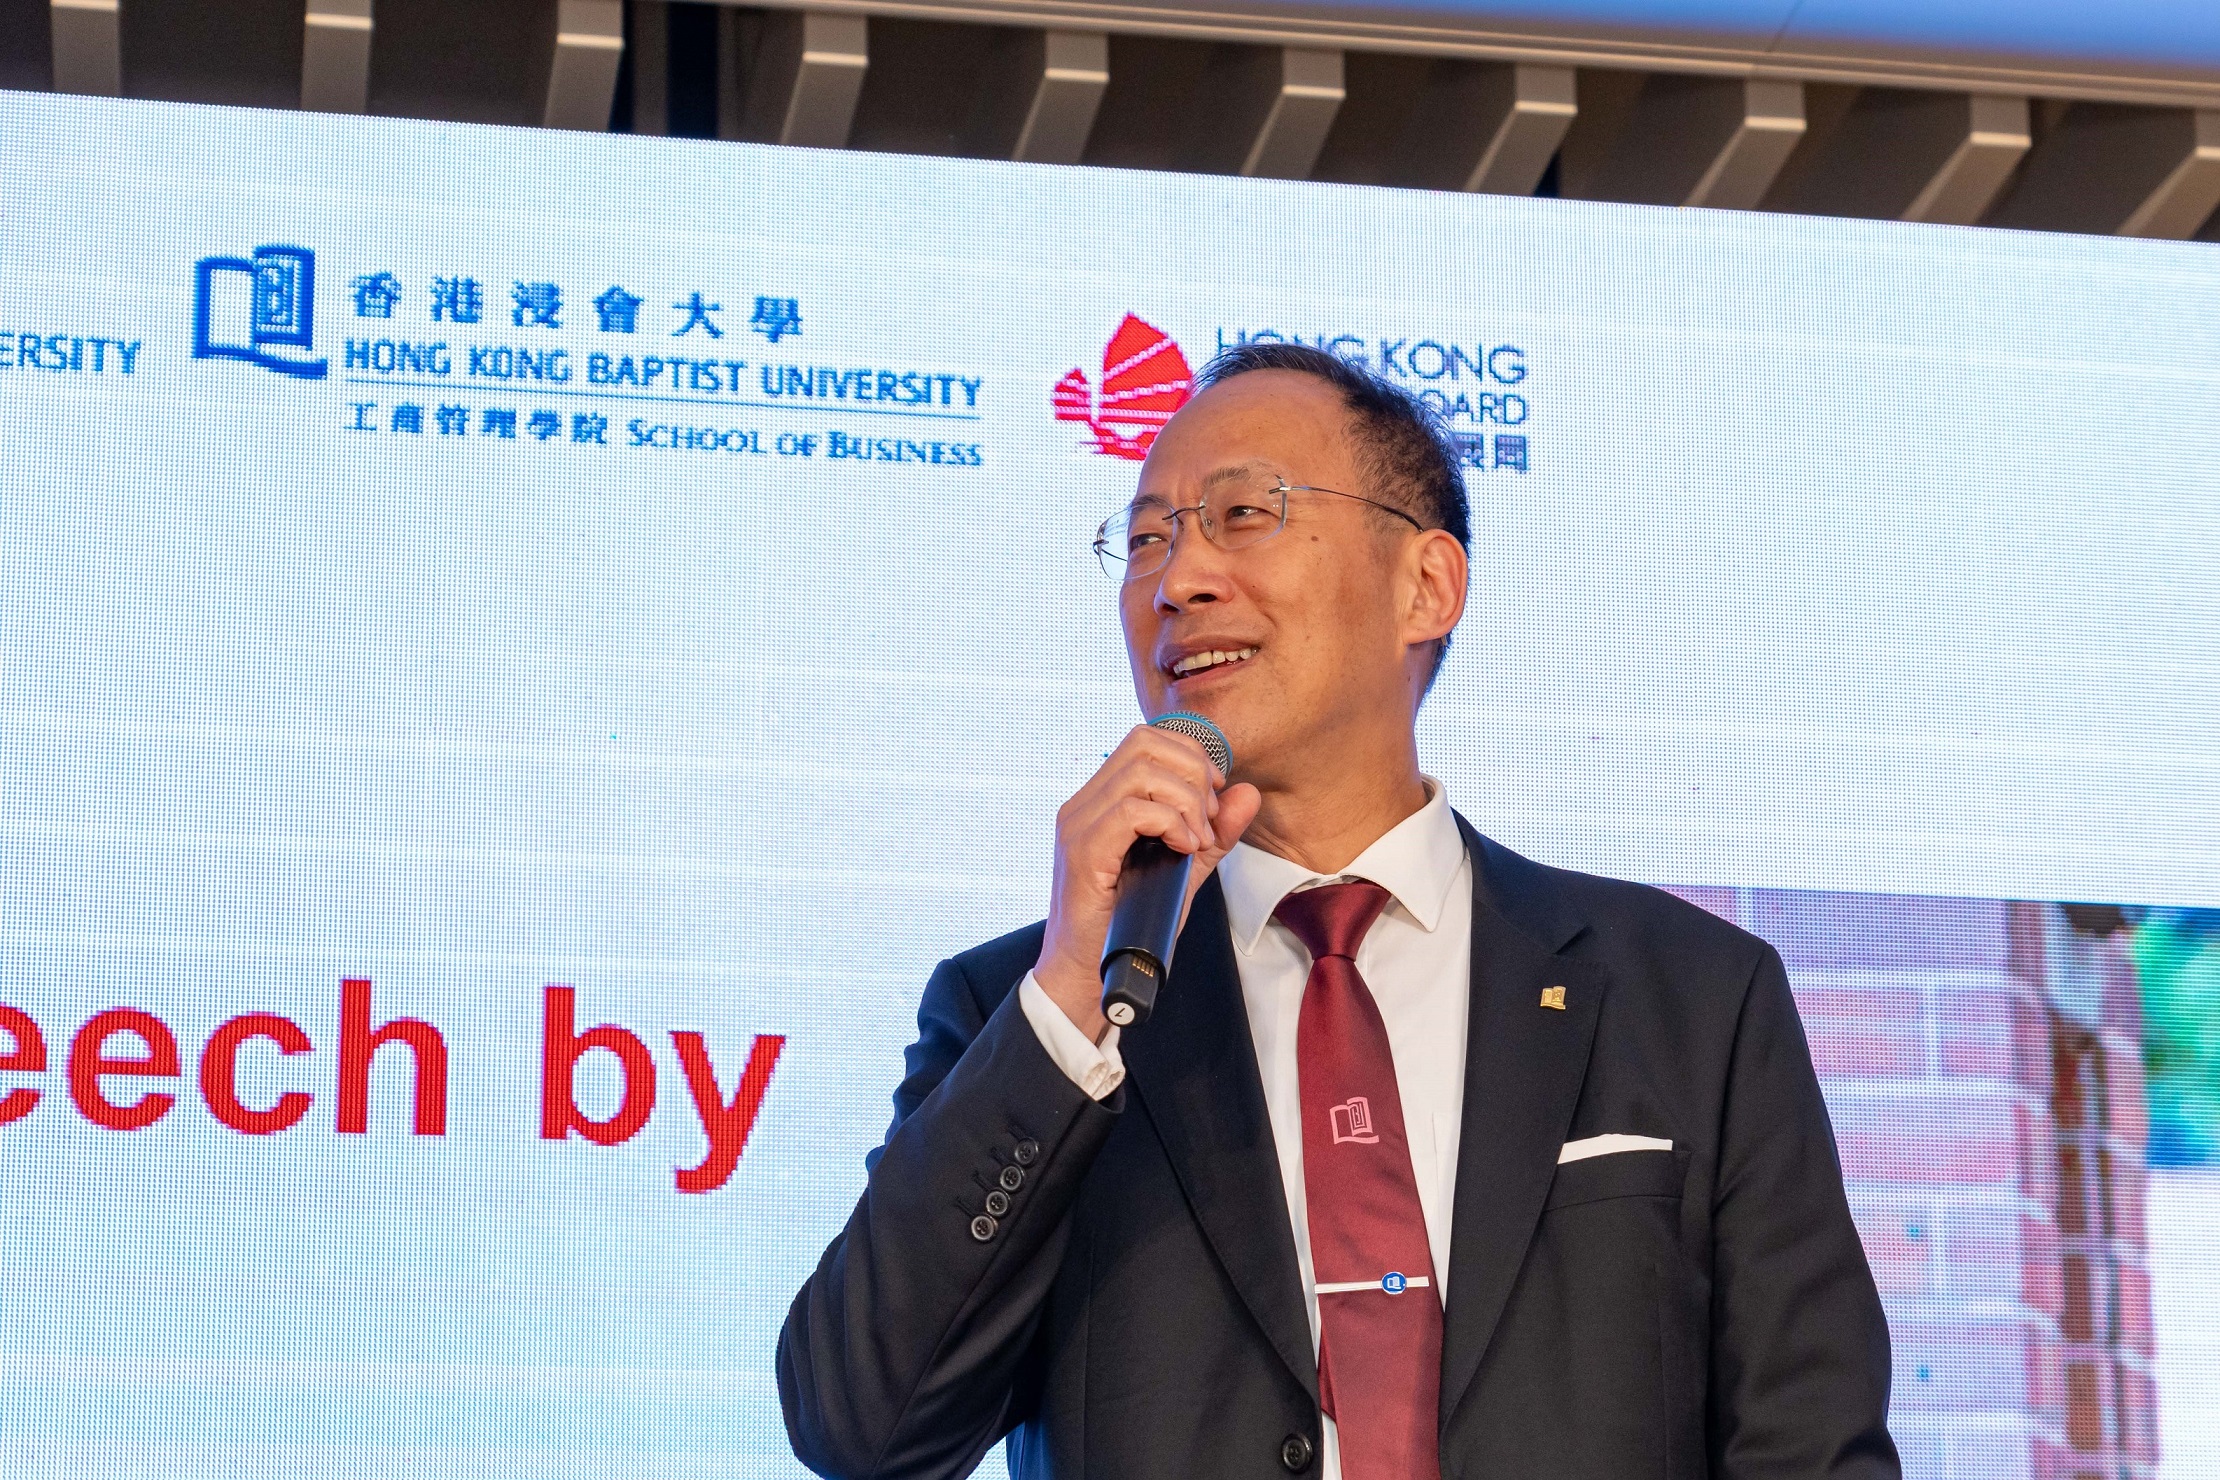 Professor Alexander Wai, President and Vice-Chancellor of HKBU said that the Conference offers an ideal platform to discuss higher education’s models and practices in the fields of business and management.